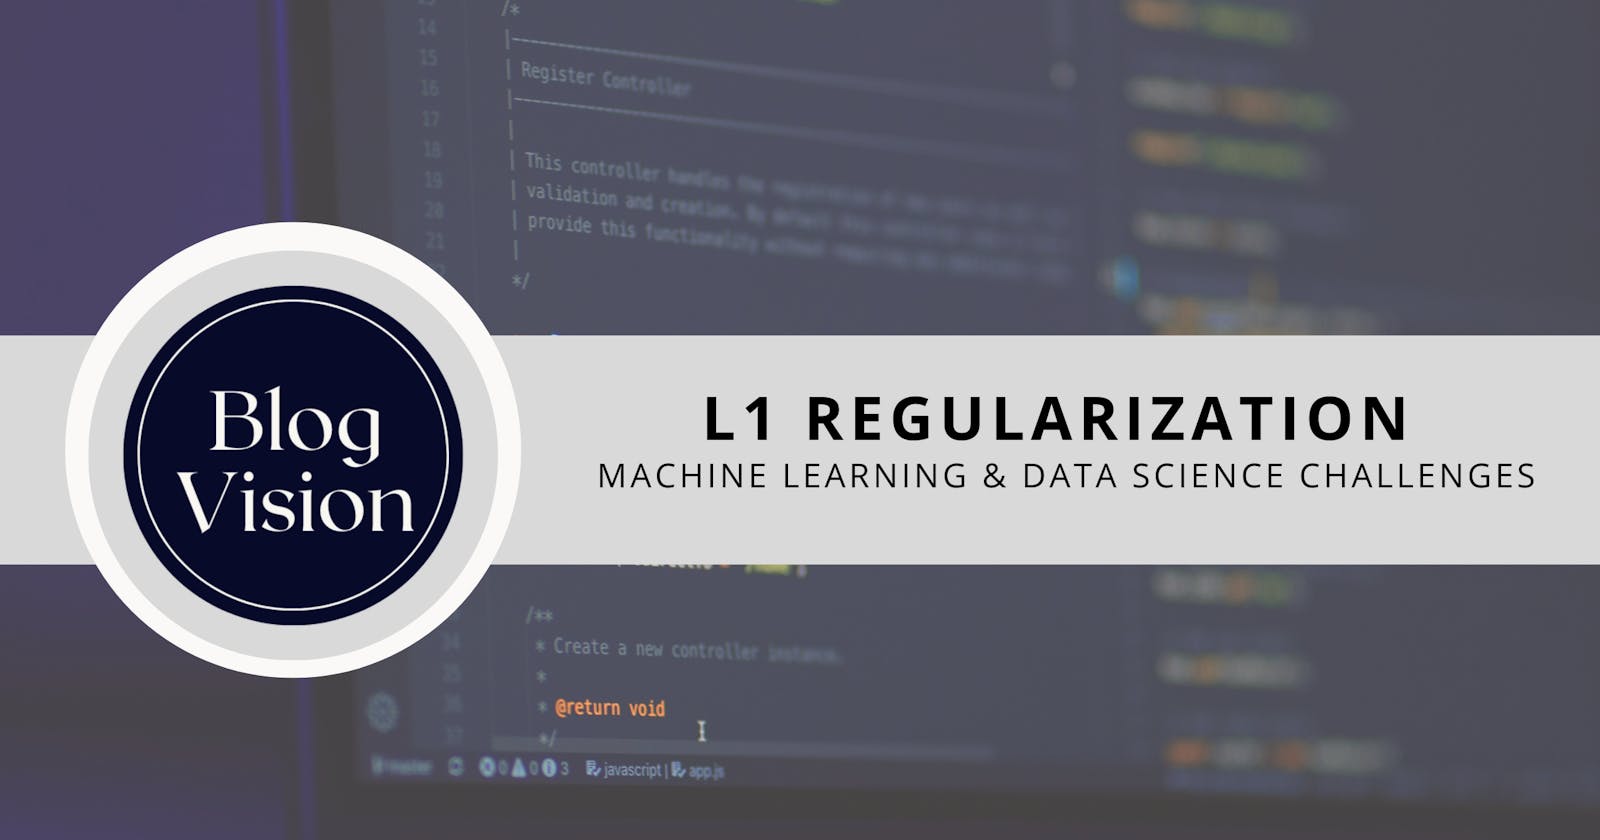 #4 Machine Learning & Data Science Challenge 4